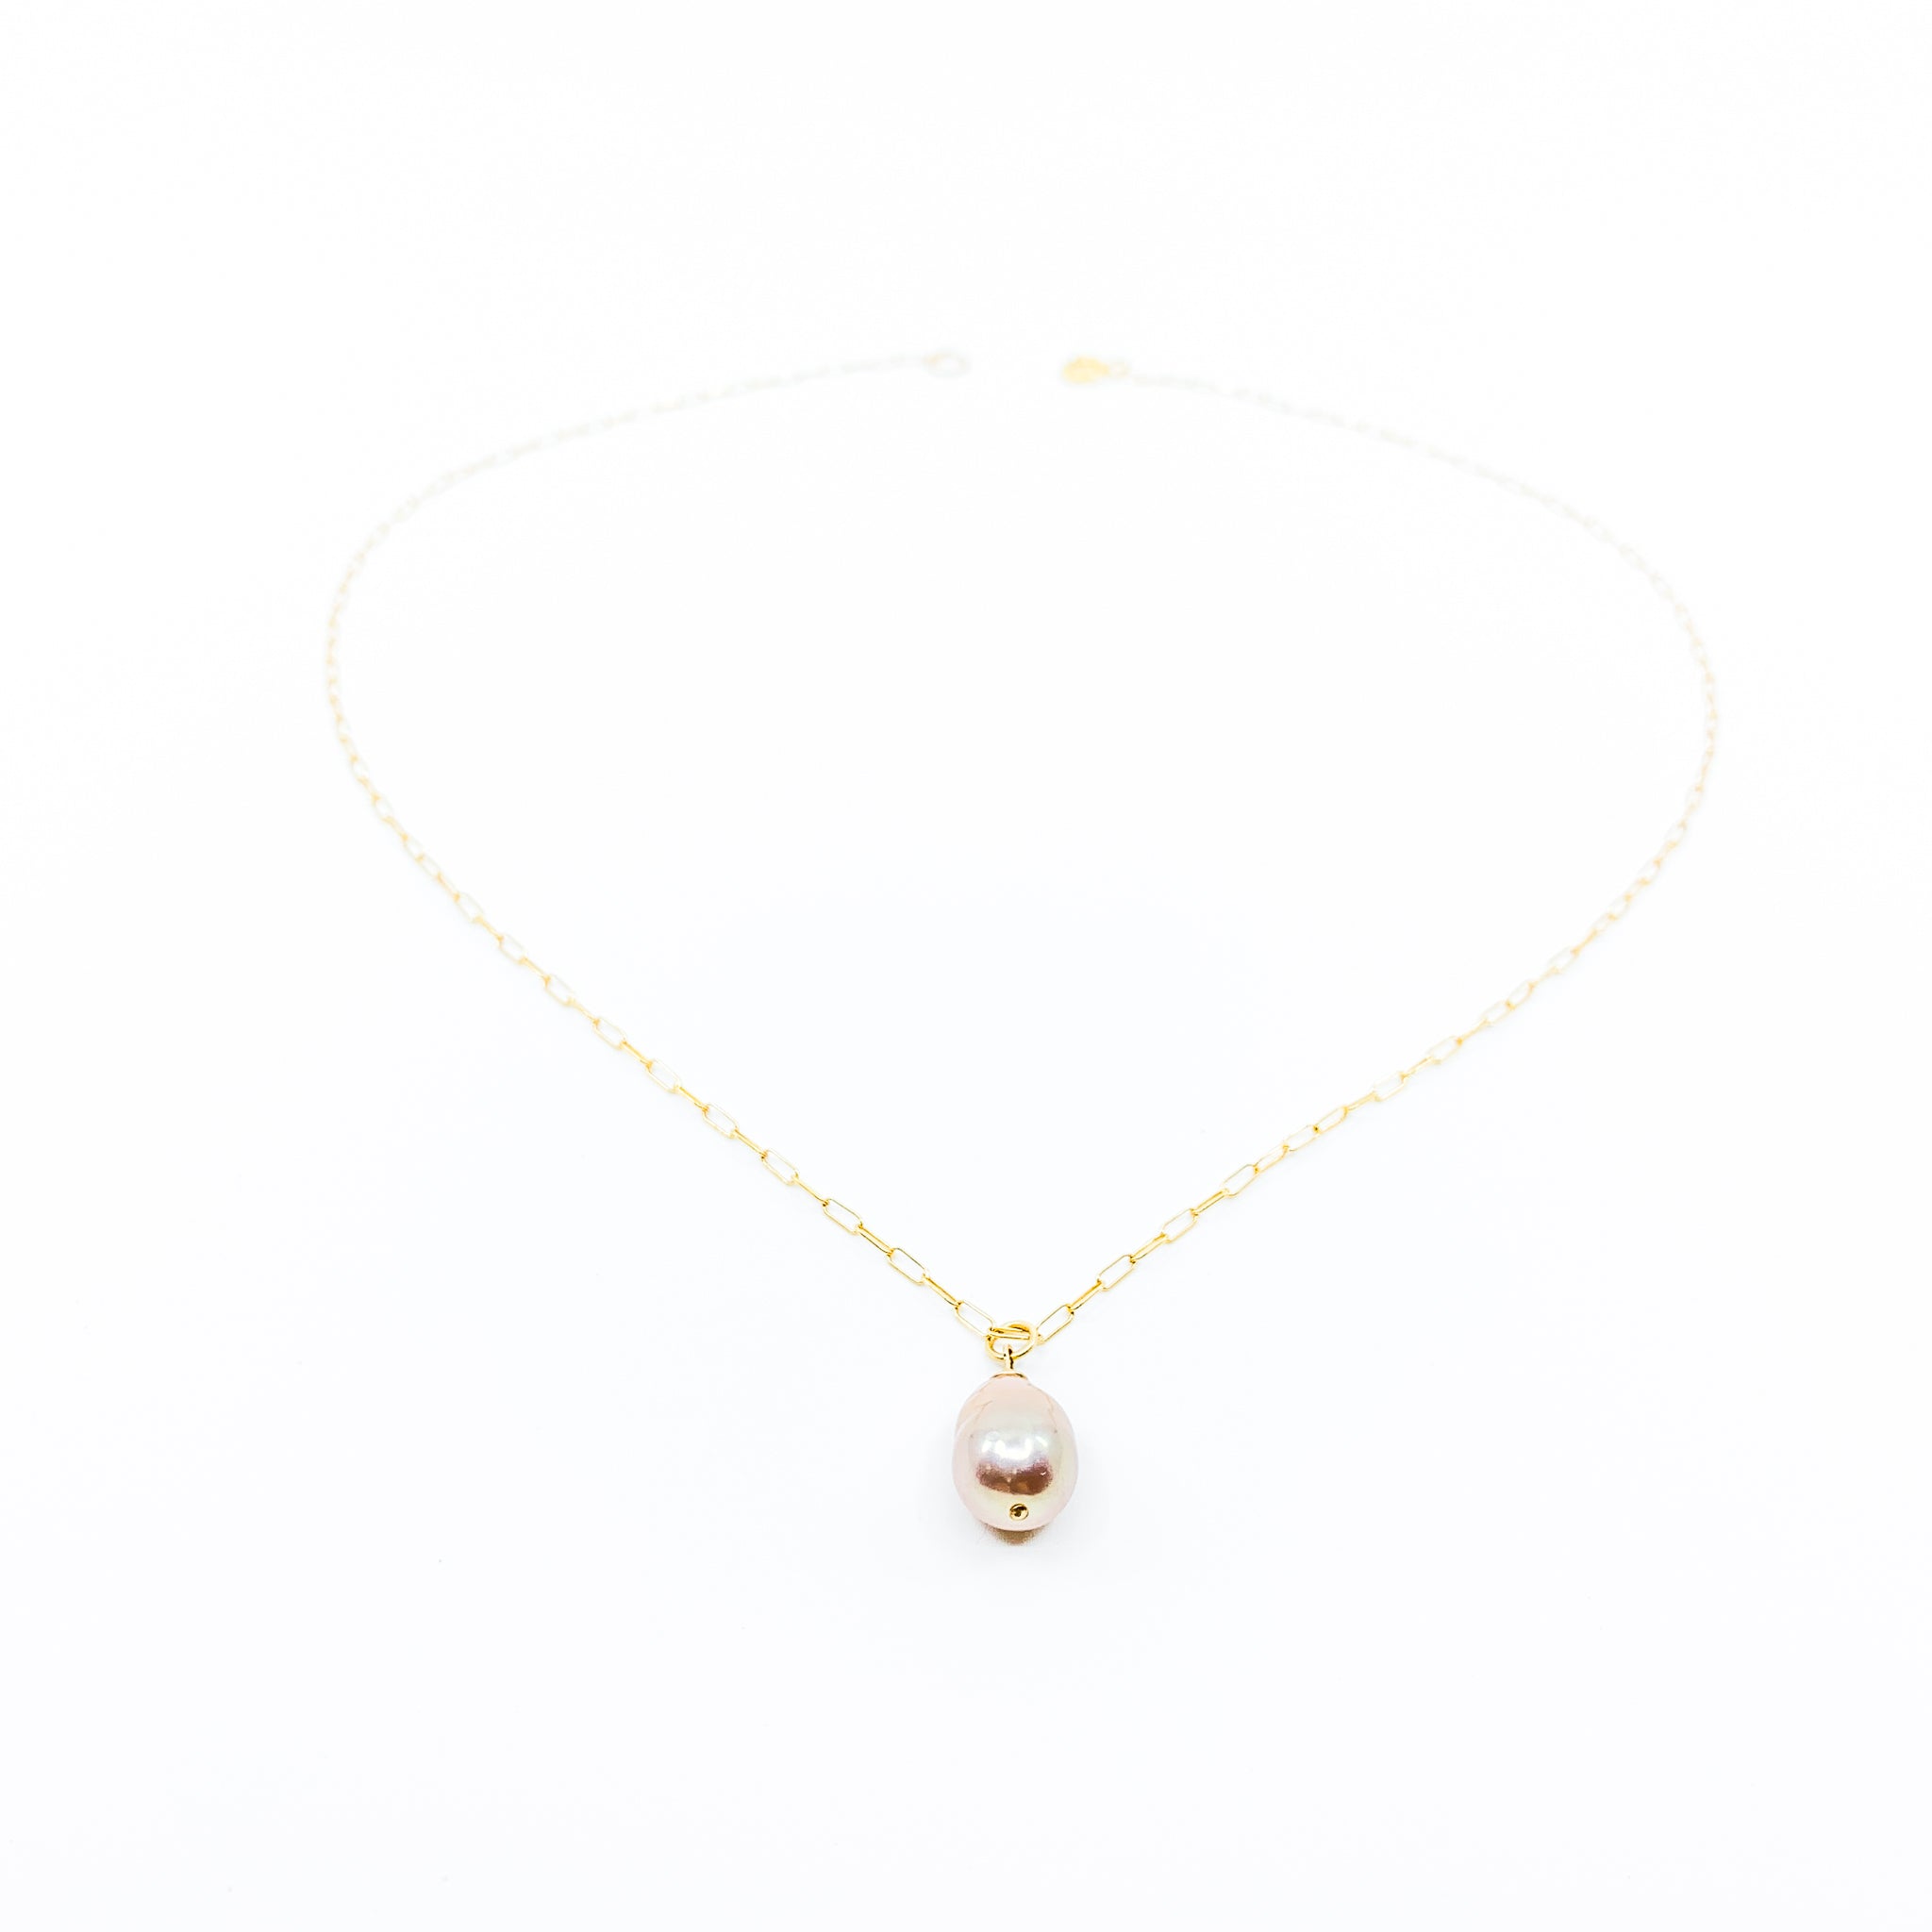 simple gold chain natural color pink baroque pearl necklace by eve black jewelry made in Hawaii  Edit alt text